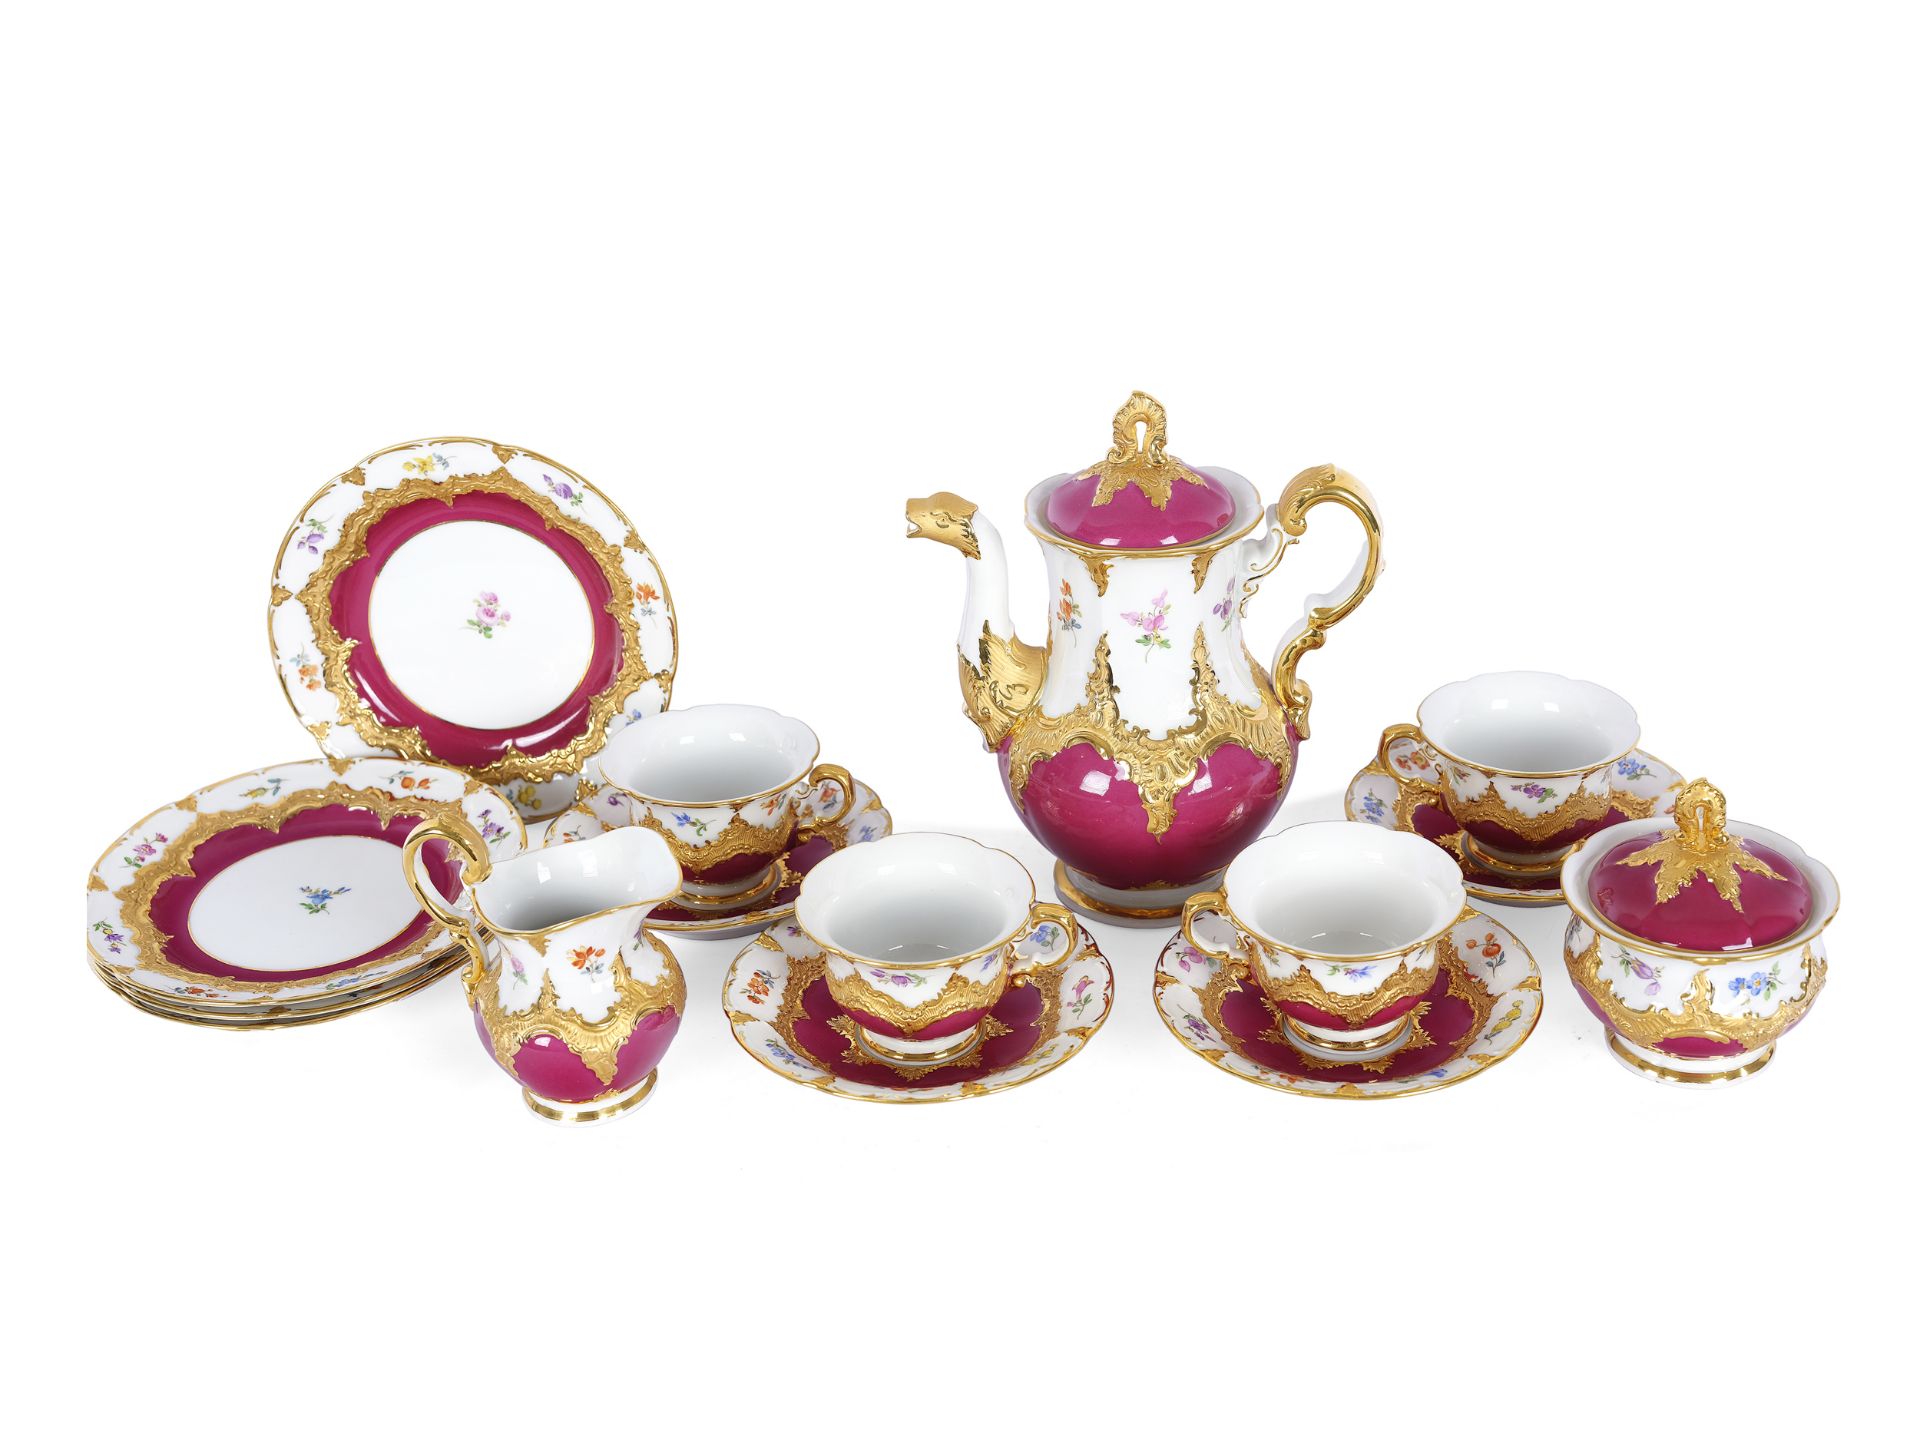 Mocha set for 4 persons, 15-piece, Meissen, B-shape decor, purple with scattered flowers - Image 3 of 6